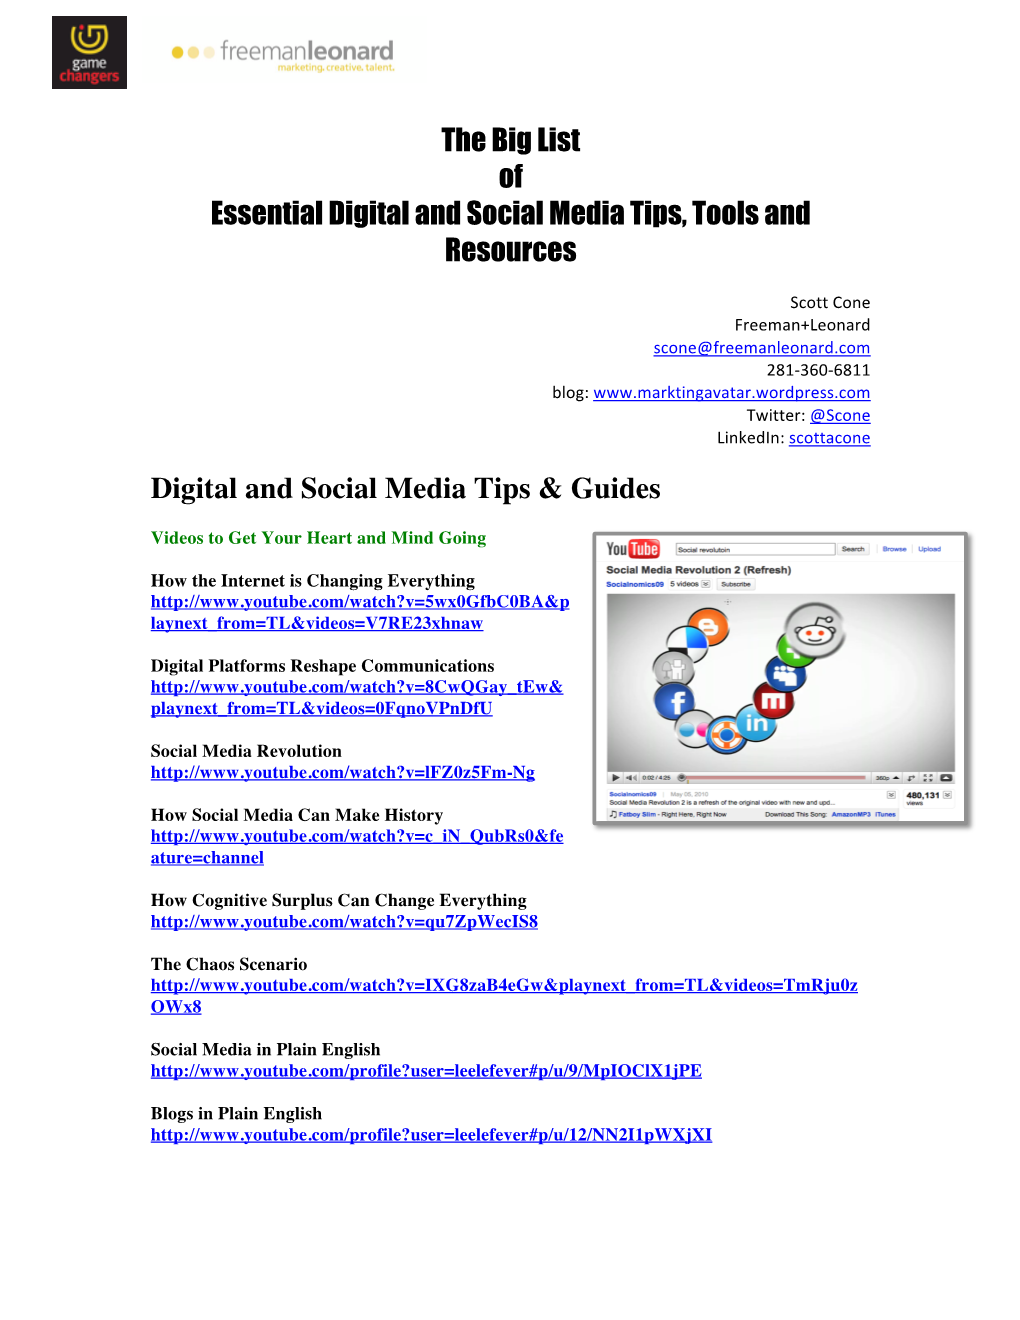 The Big List of Essential Digital and Social Media Tips, Tools and Resources